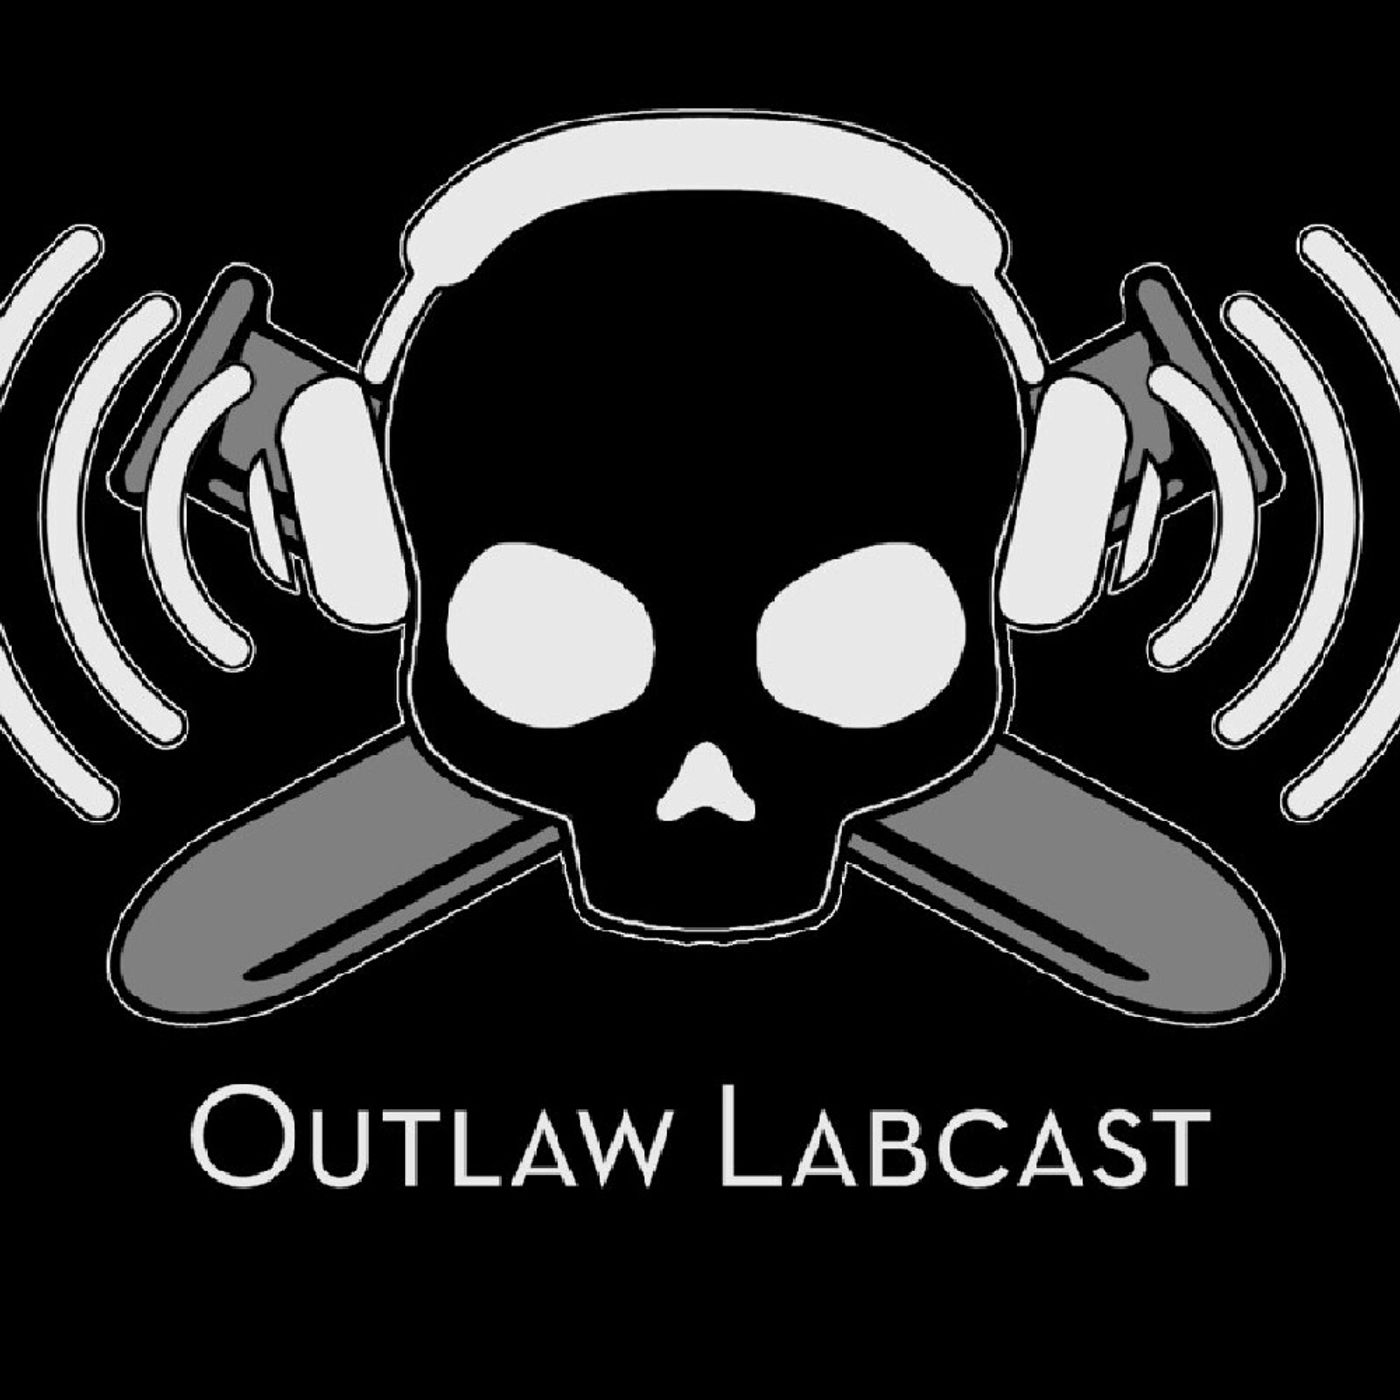 Jp Outlaw's show